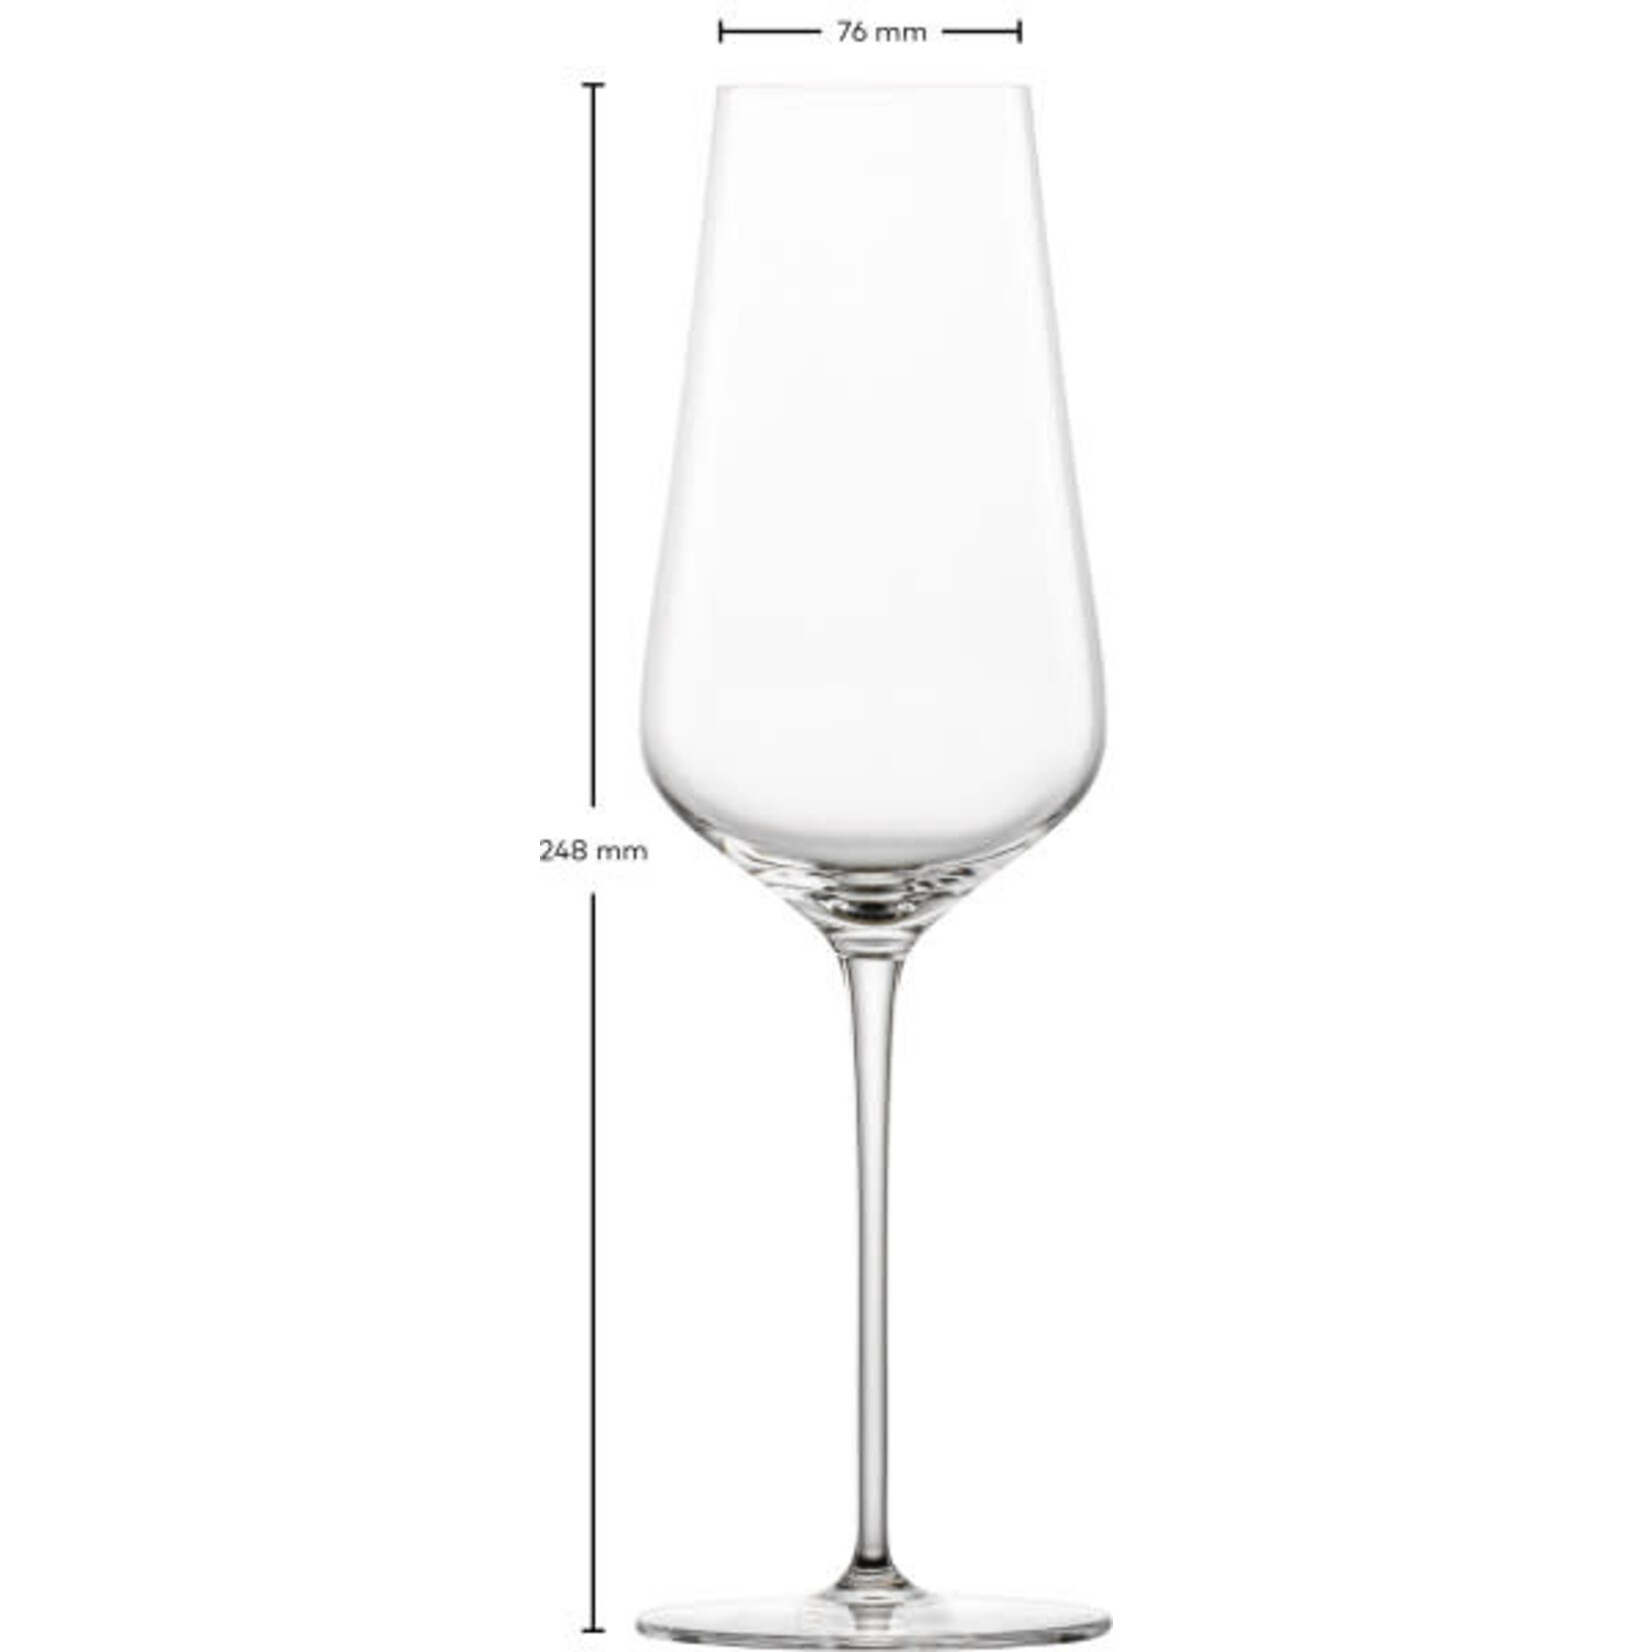 Zwiesel Collection Glas Doos-2 Duo-77 Zwiesel Duo-77  Champagne glas 378 ml Duo Zwiesel glas 123474